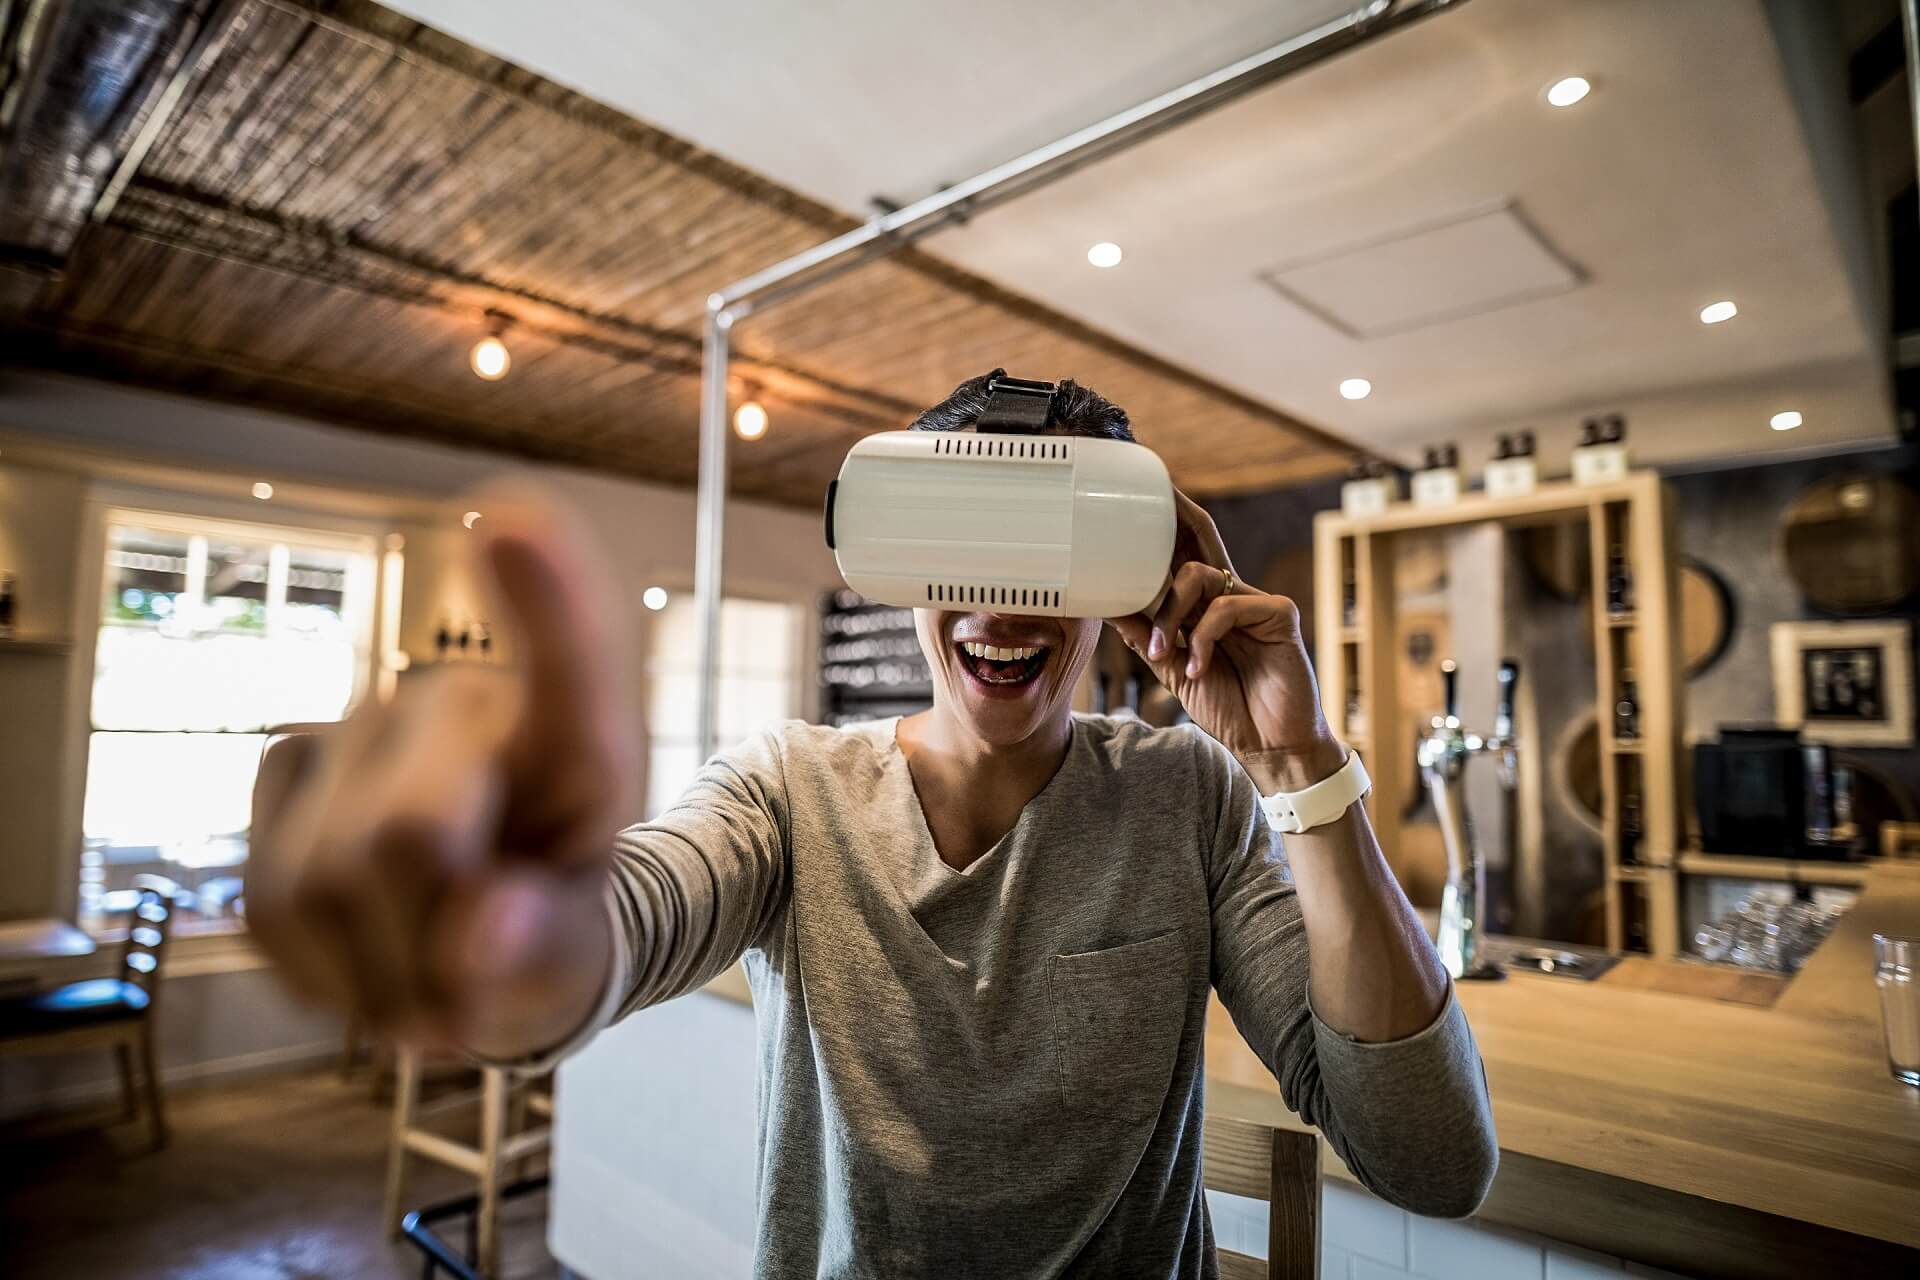 Restaurant owner is excited about commercial kitchen planning using virtual reality 